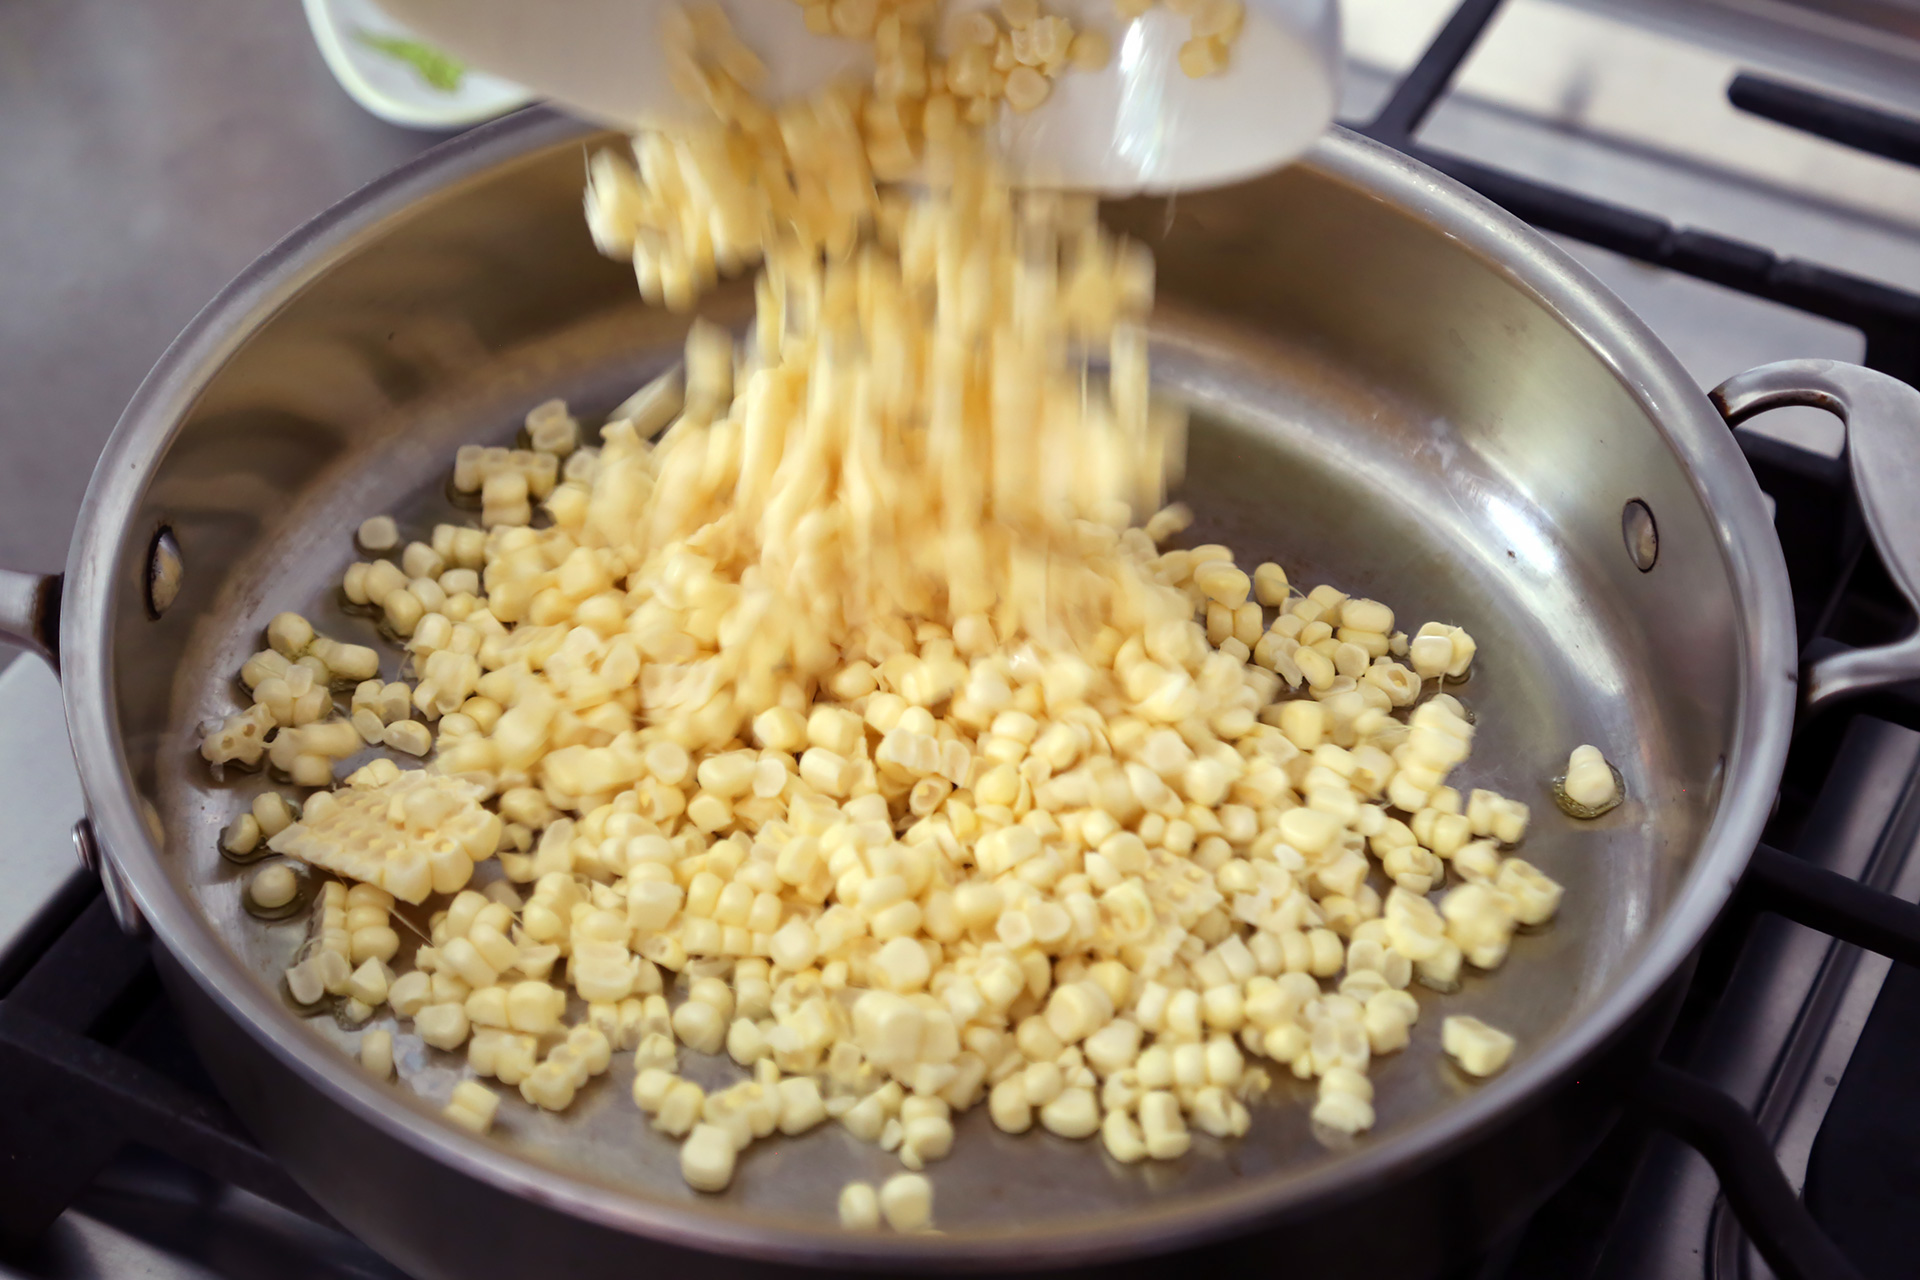 In a large frying pan over medium heat, warm the oil. Add the corn.